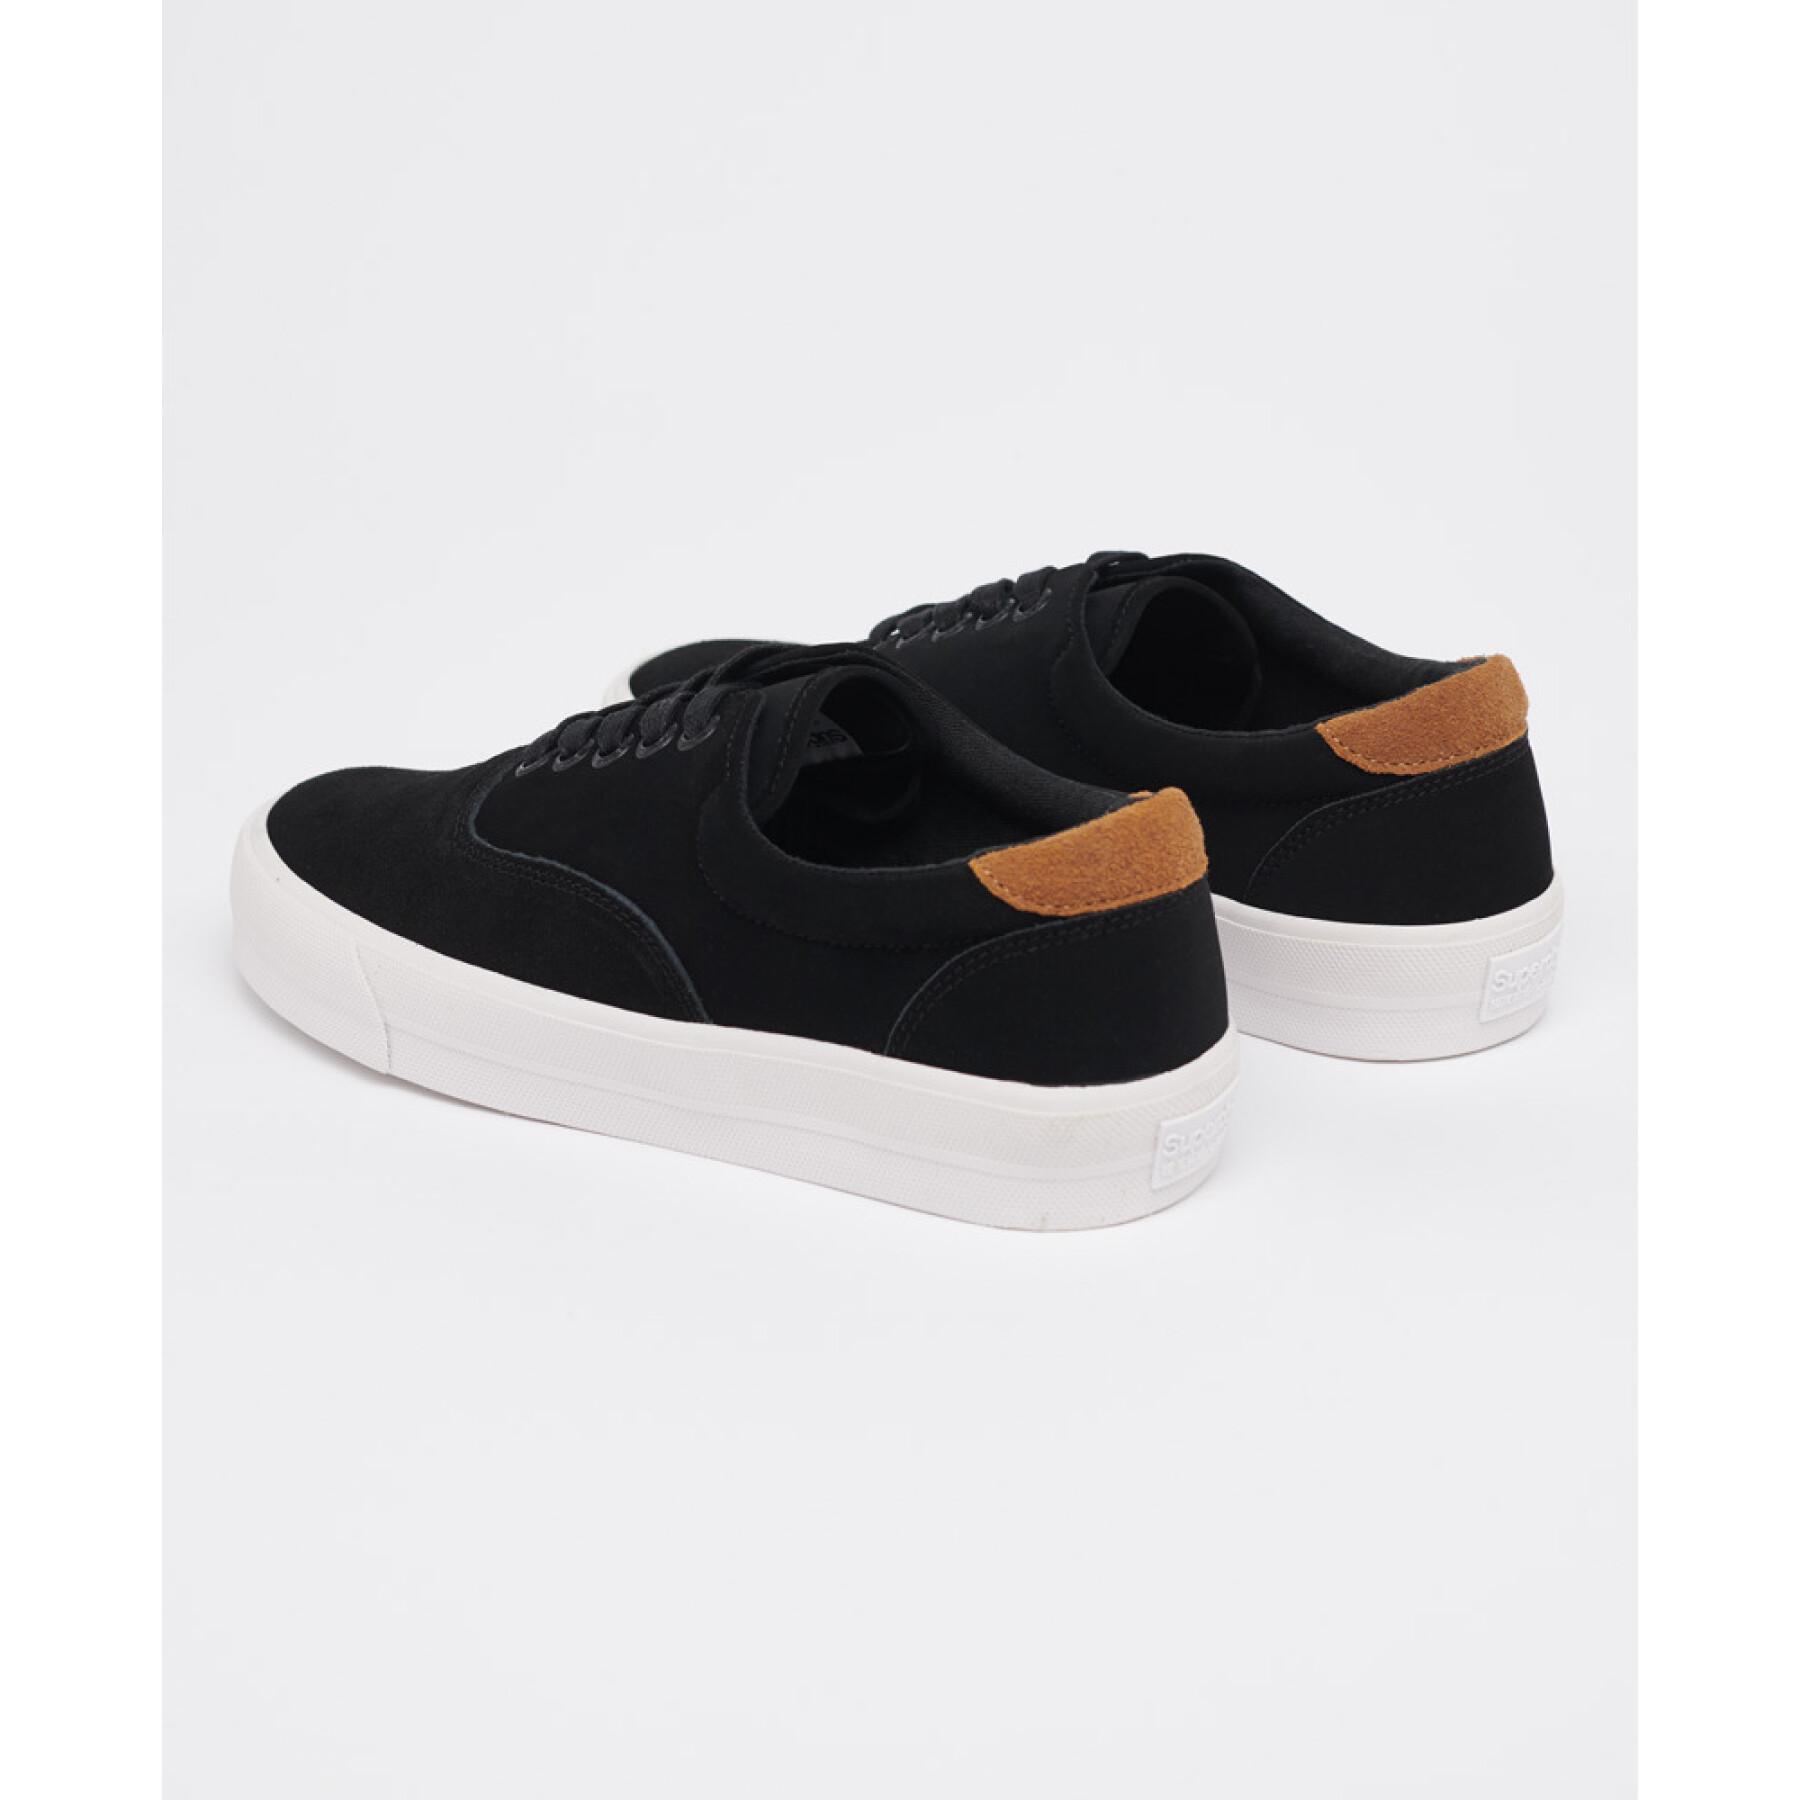 Women's lace-up sneakers Superdry Premium